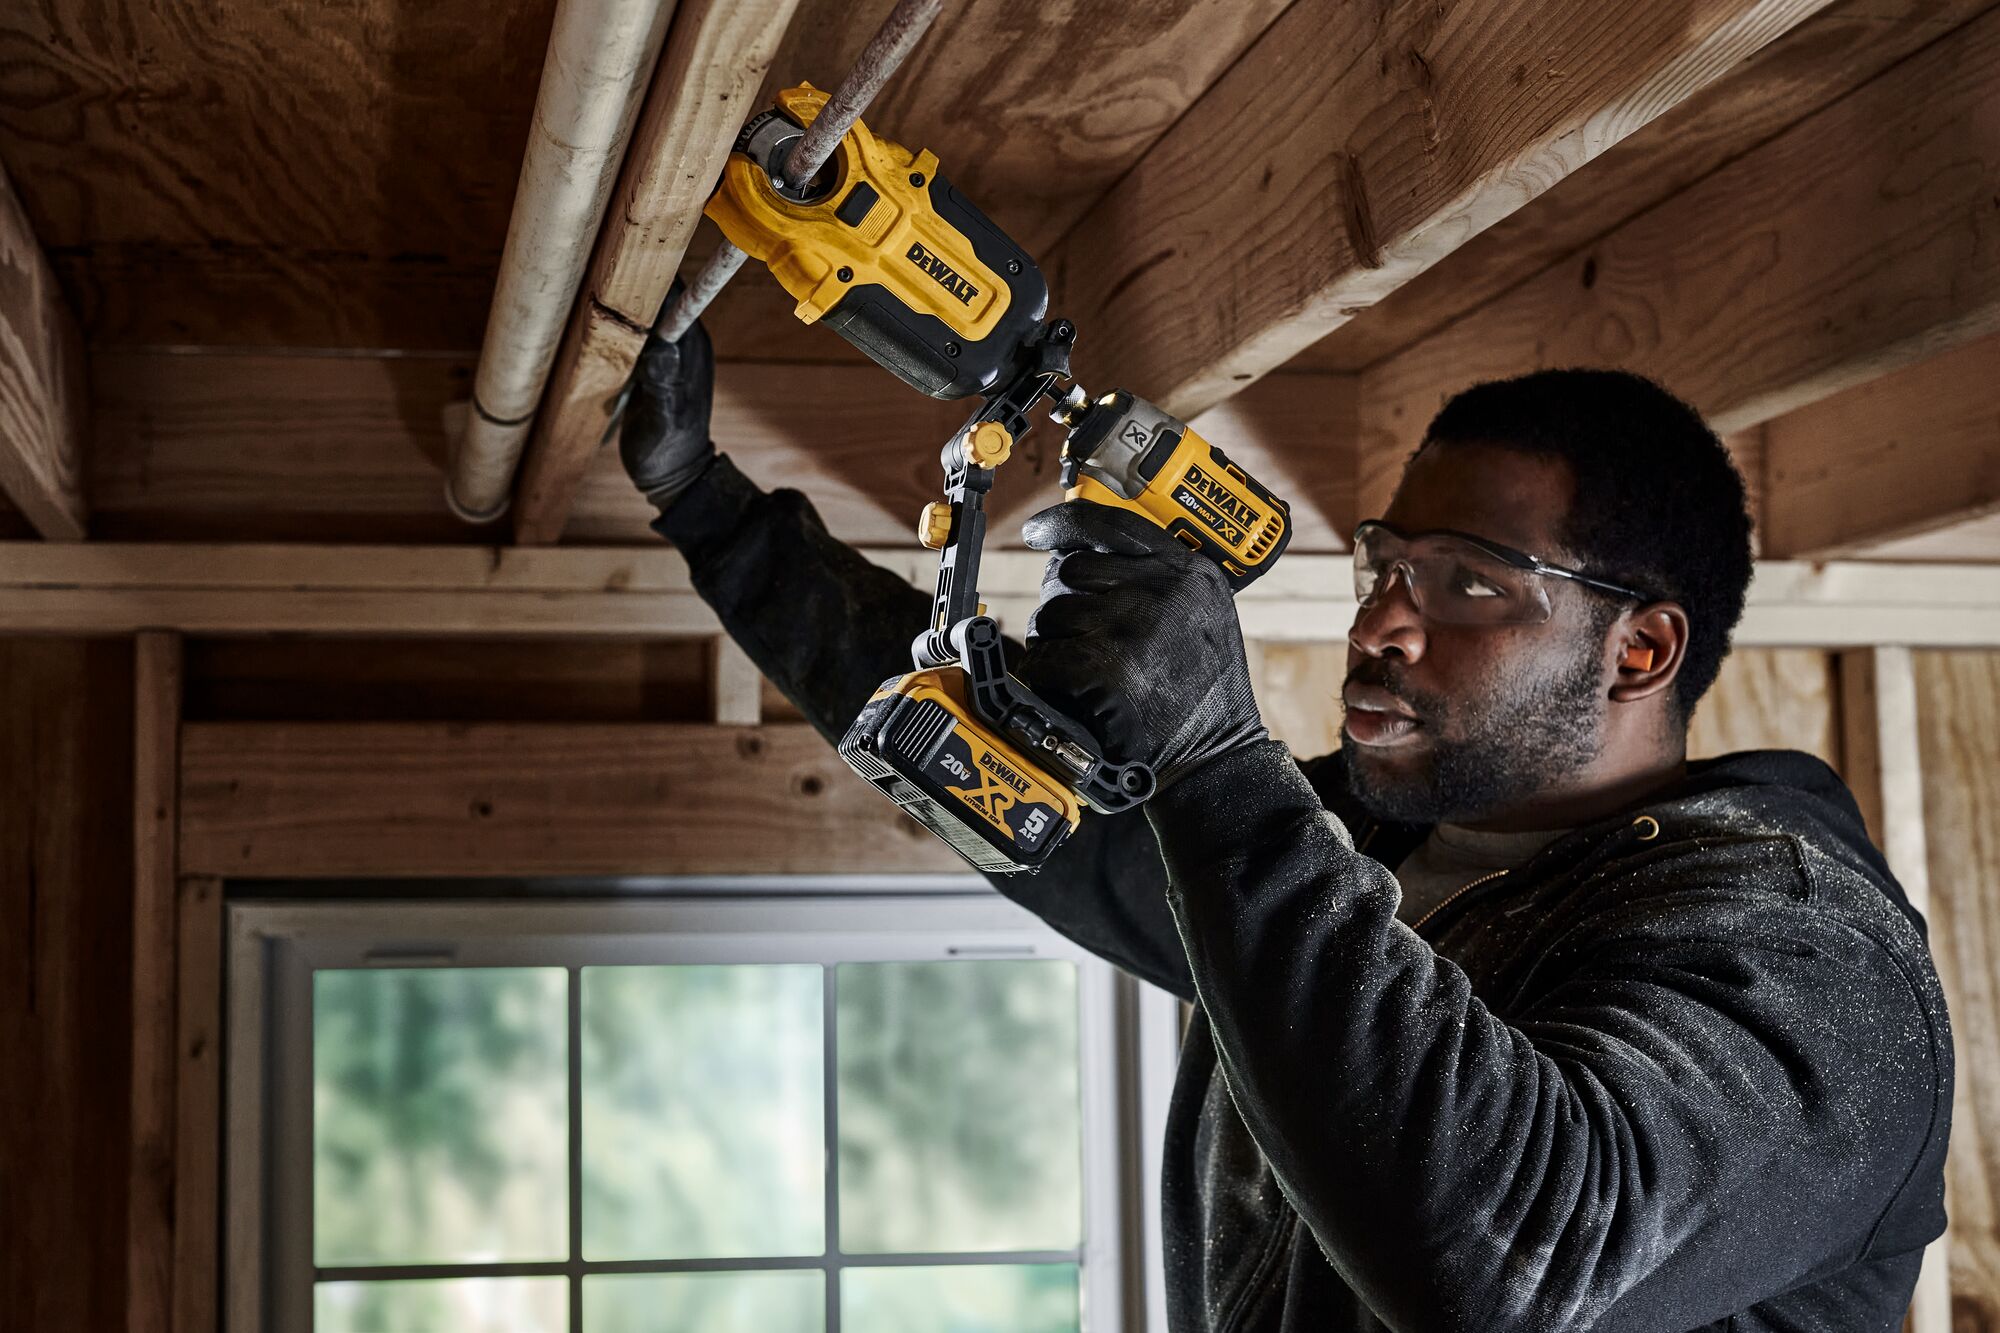 End user using DEWALT IMPACT CONNECT Copper Cutter attachment on Impact Driver to cut copper pipe running along board above his head.